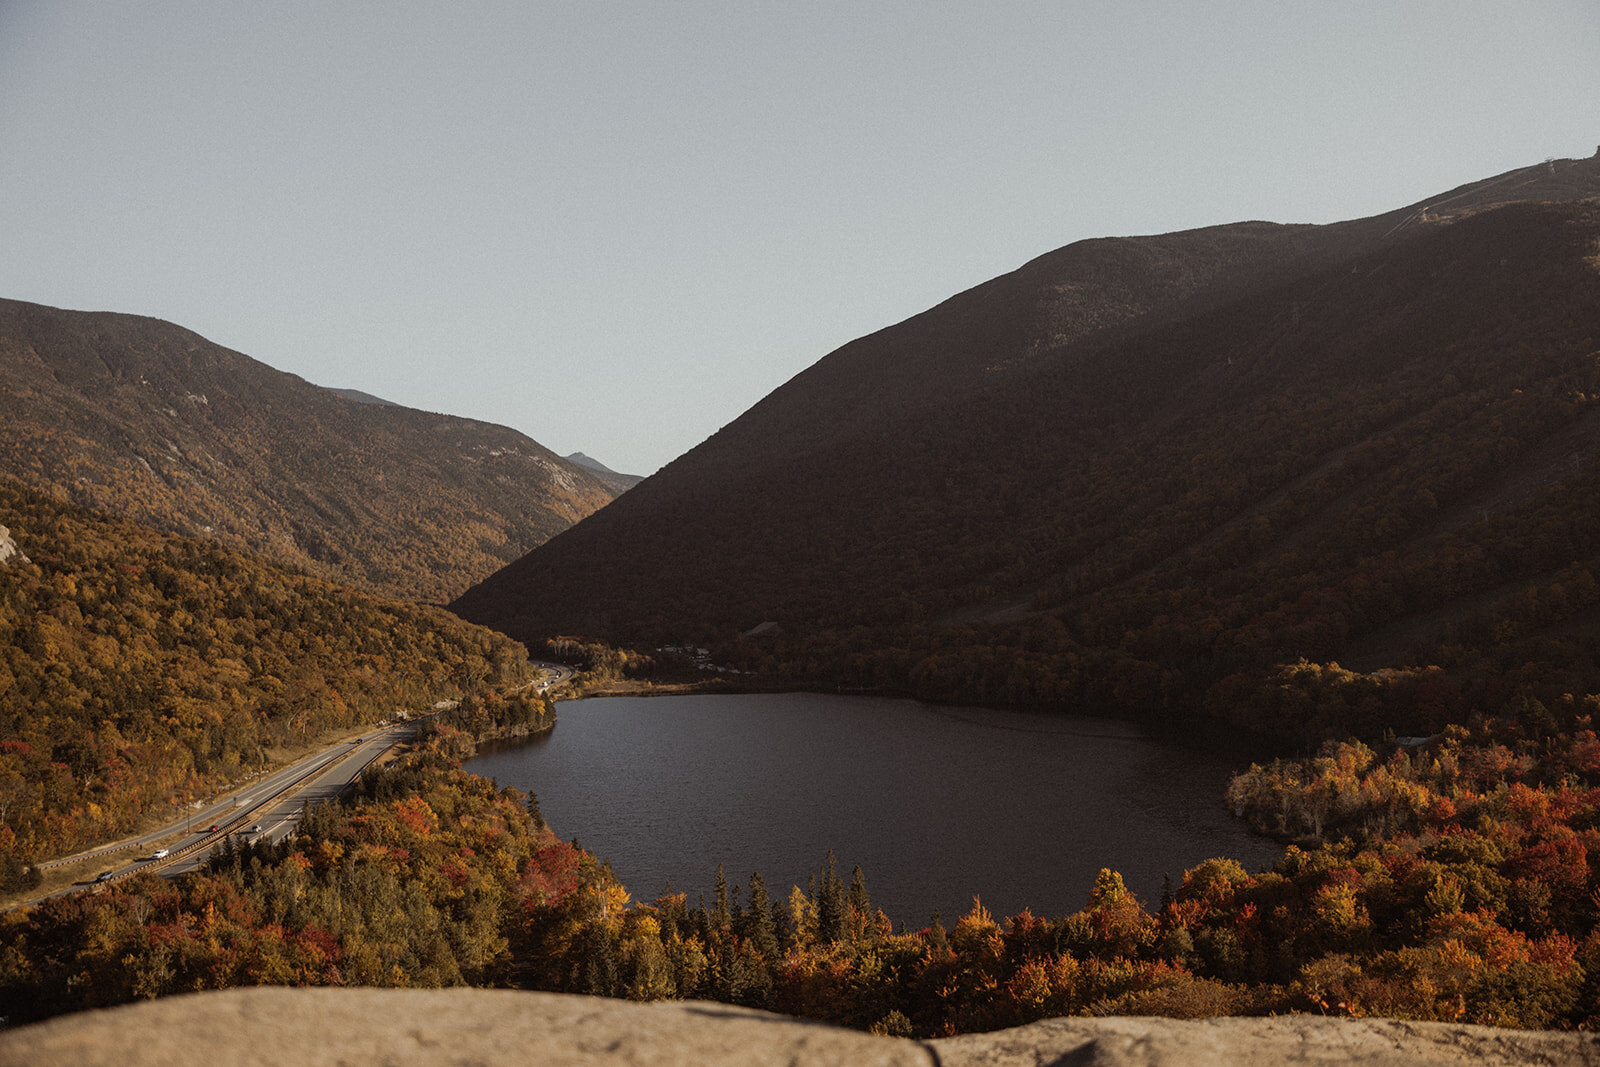 Fall Engagement Photos in the White Mountains, NH | Sydney Kerbyson Photography